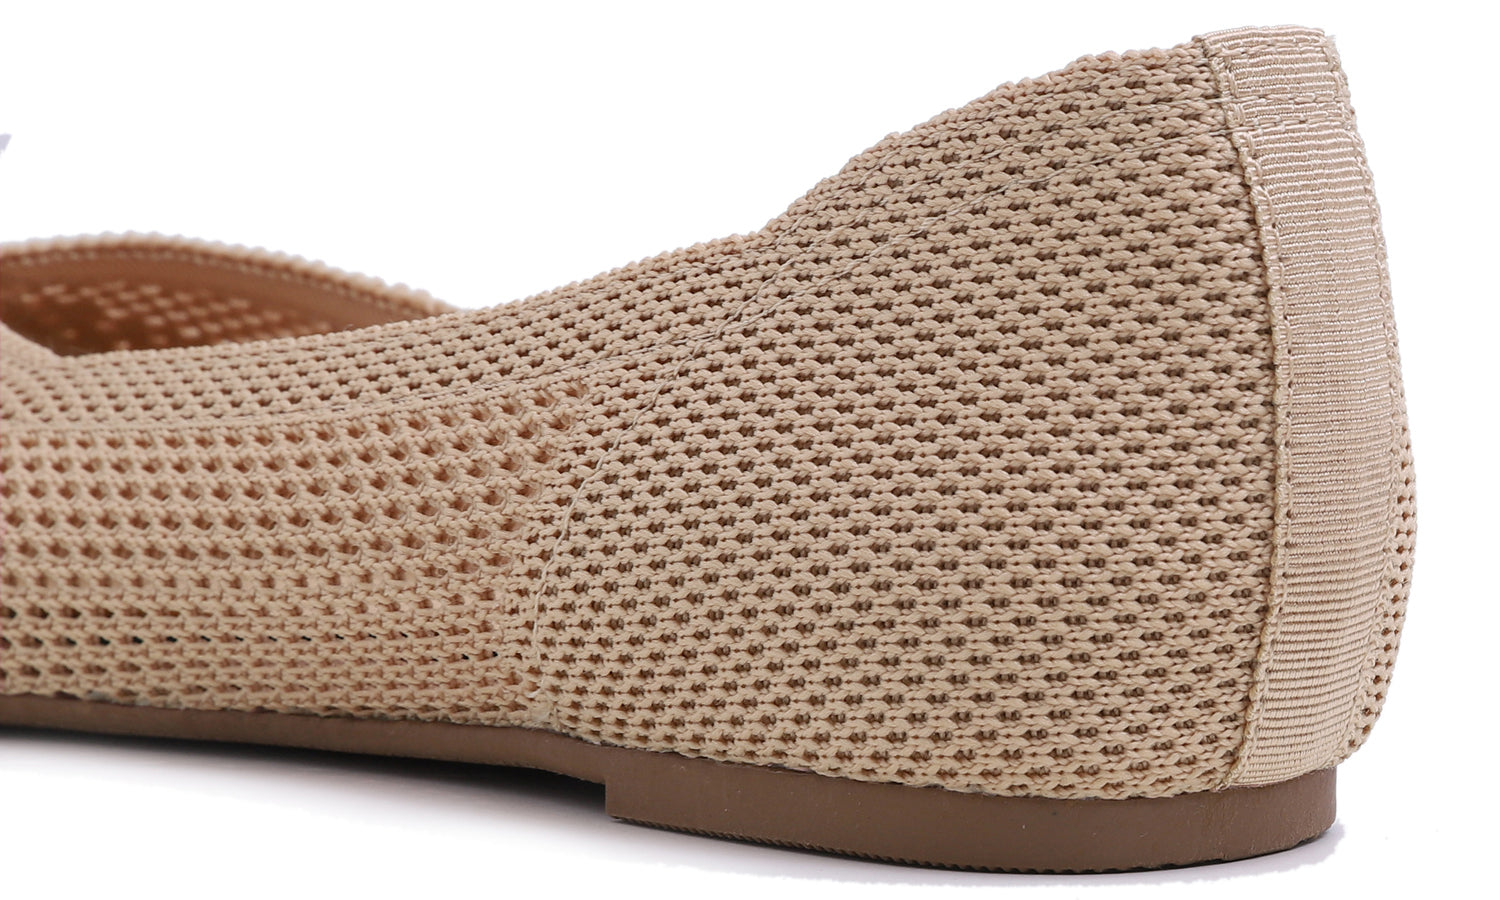 Feversole Women's Woven Fashion Breathable Knit Flat Shoes Nude Color Ballet